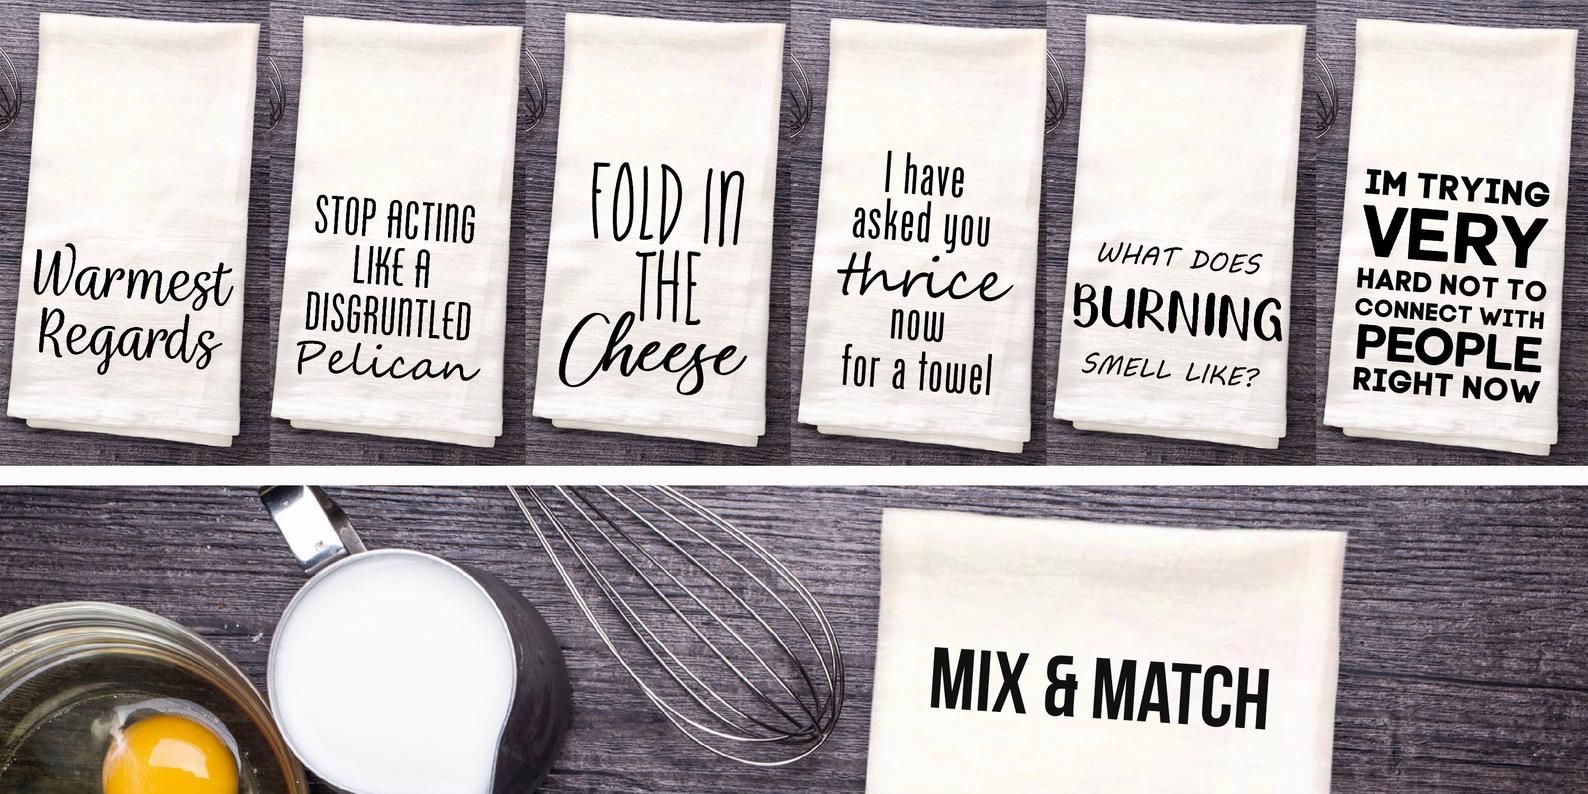 Funny Kitchen Towel Set I Have Asked You Thrice Now Set of 2 David Fold in the Cheese Schitt’s Creek Themed Tea Towels